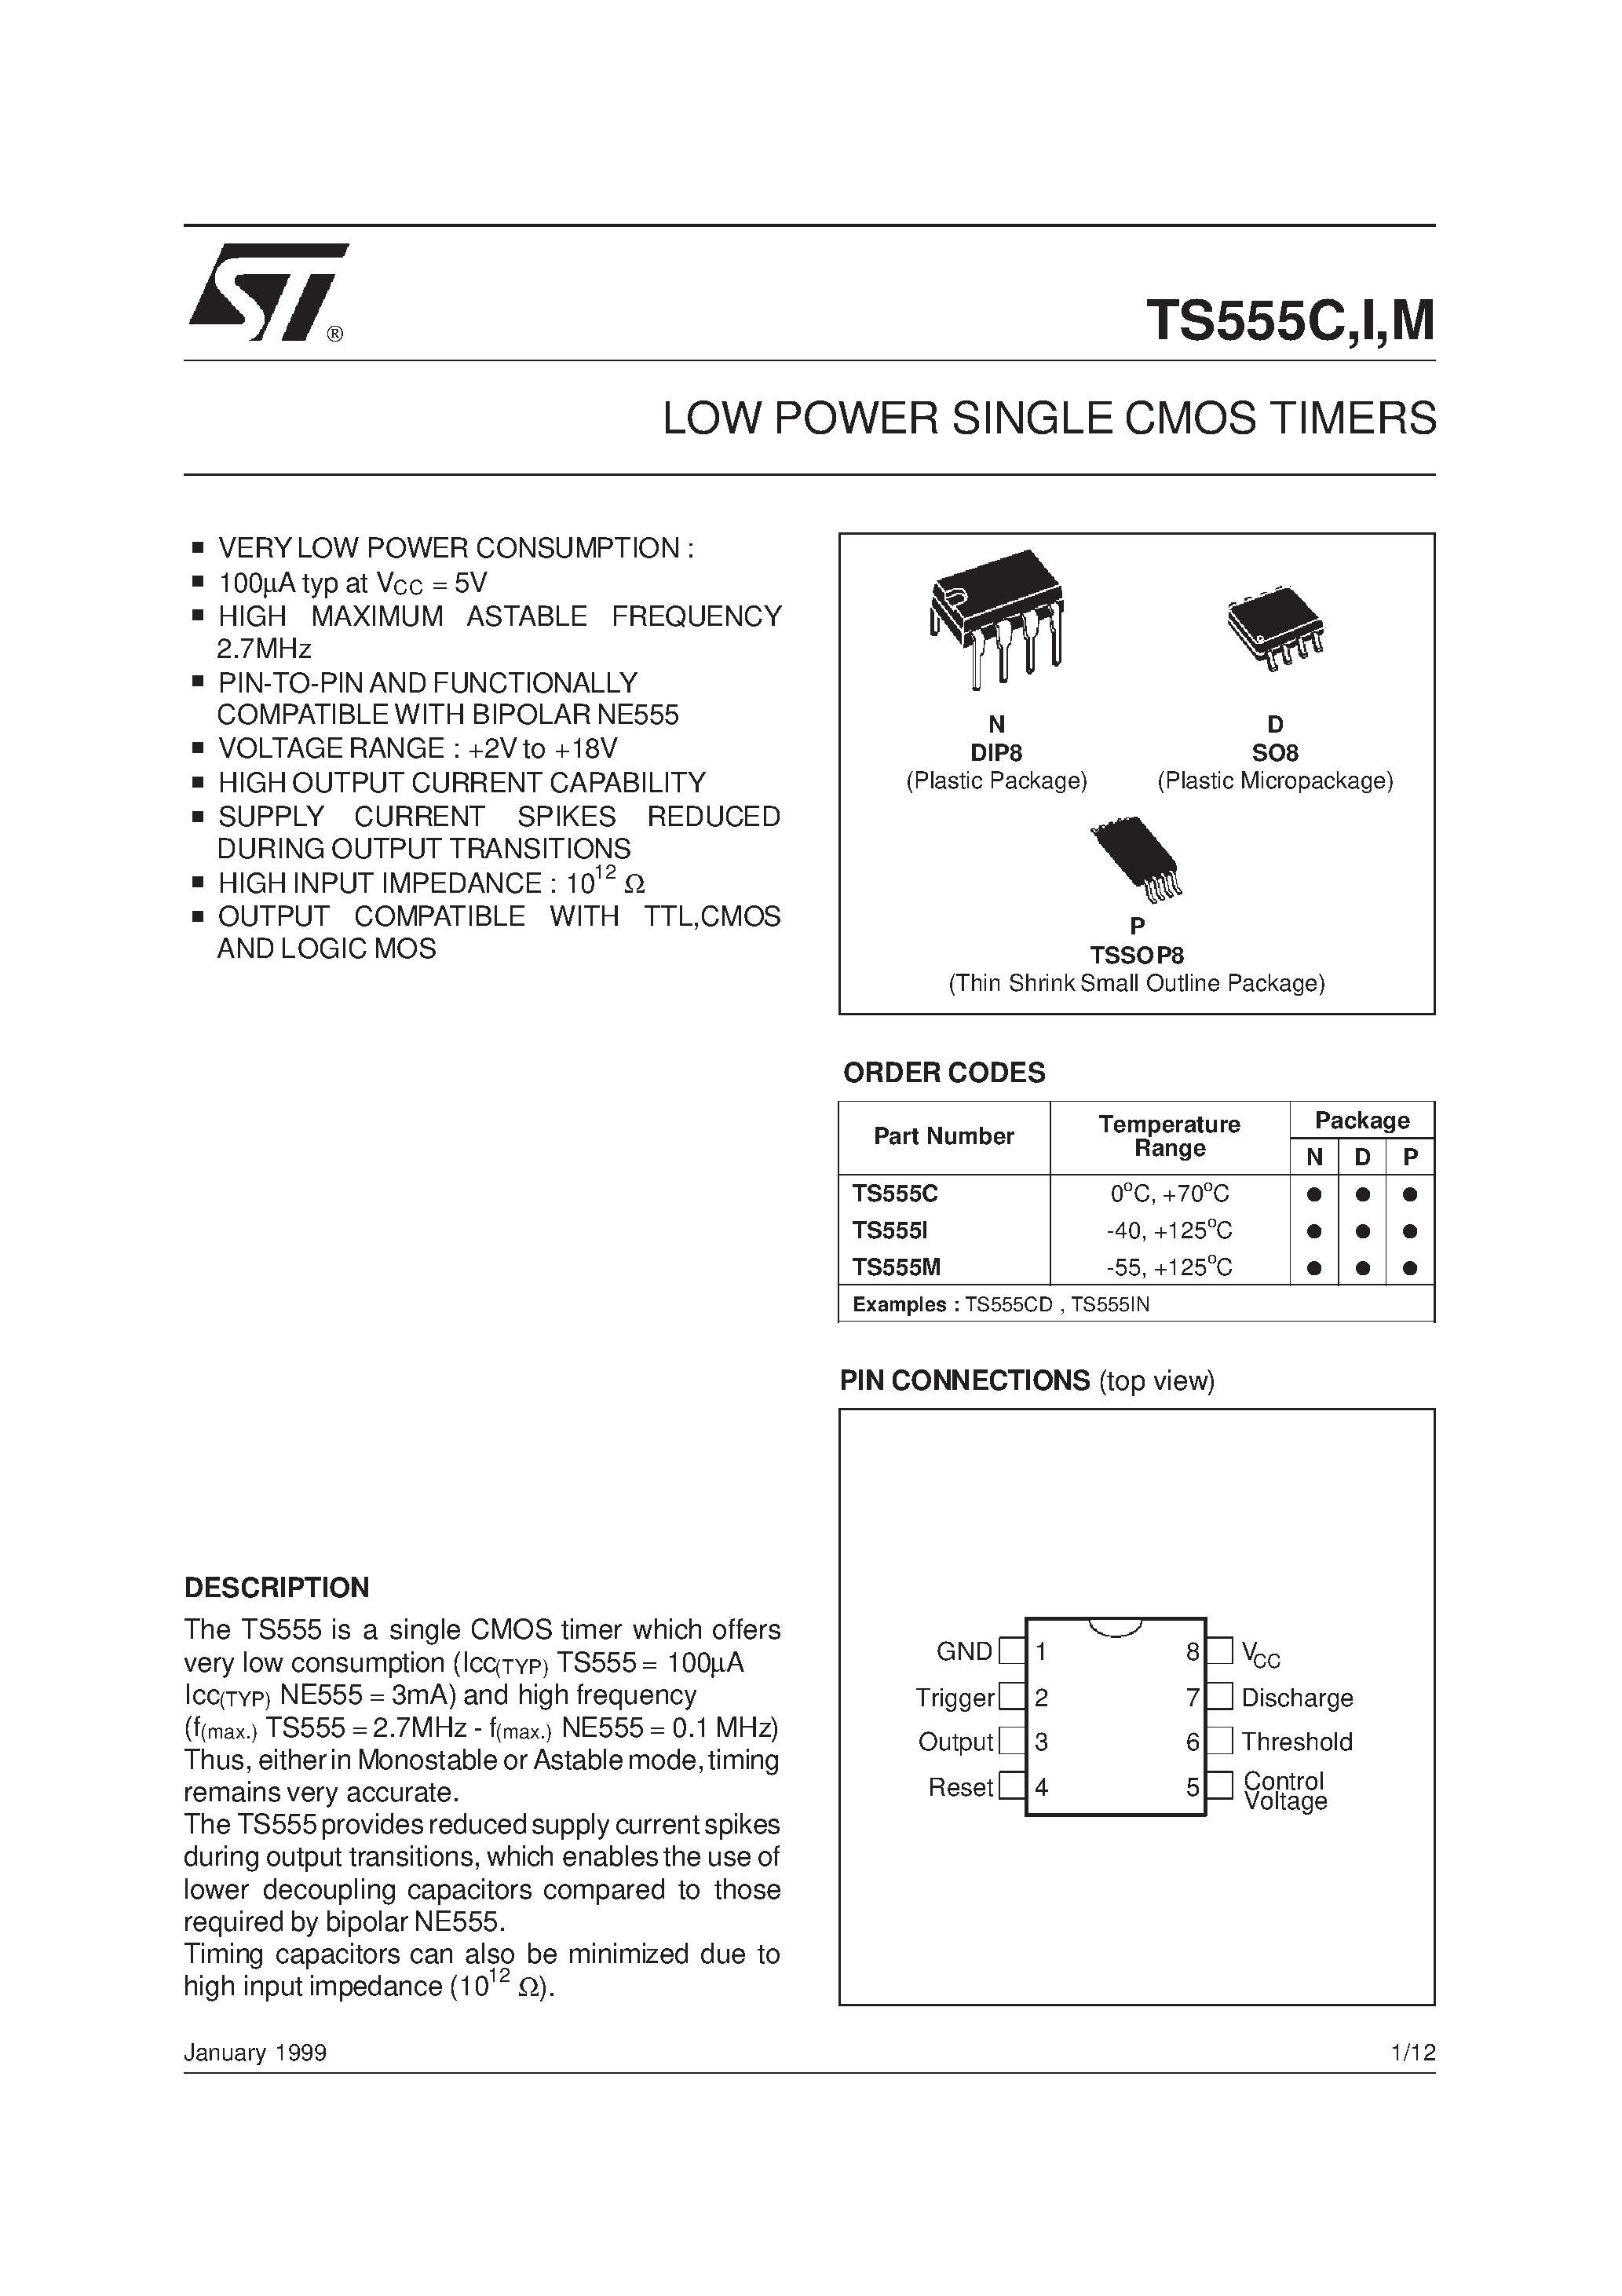 Datasheet TS555MP - LOW POWER SINGLE CMOS TIMERS page 1